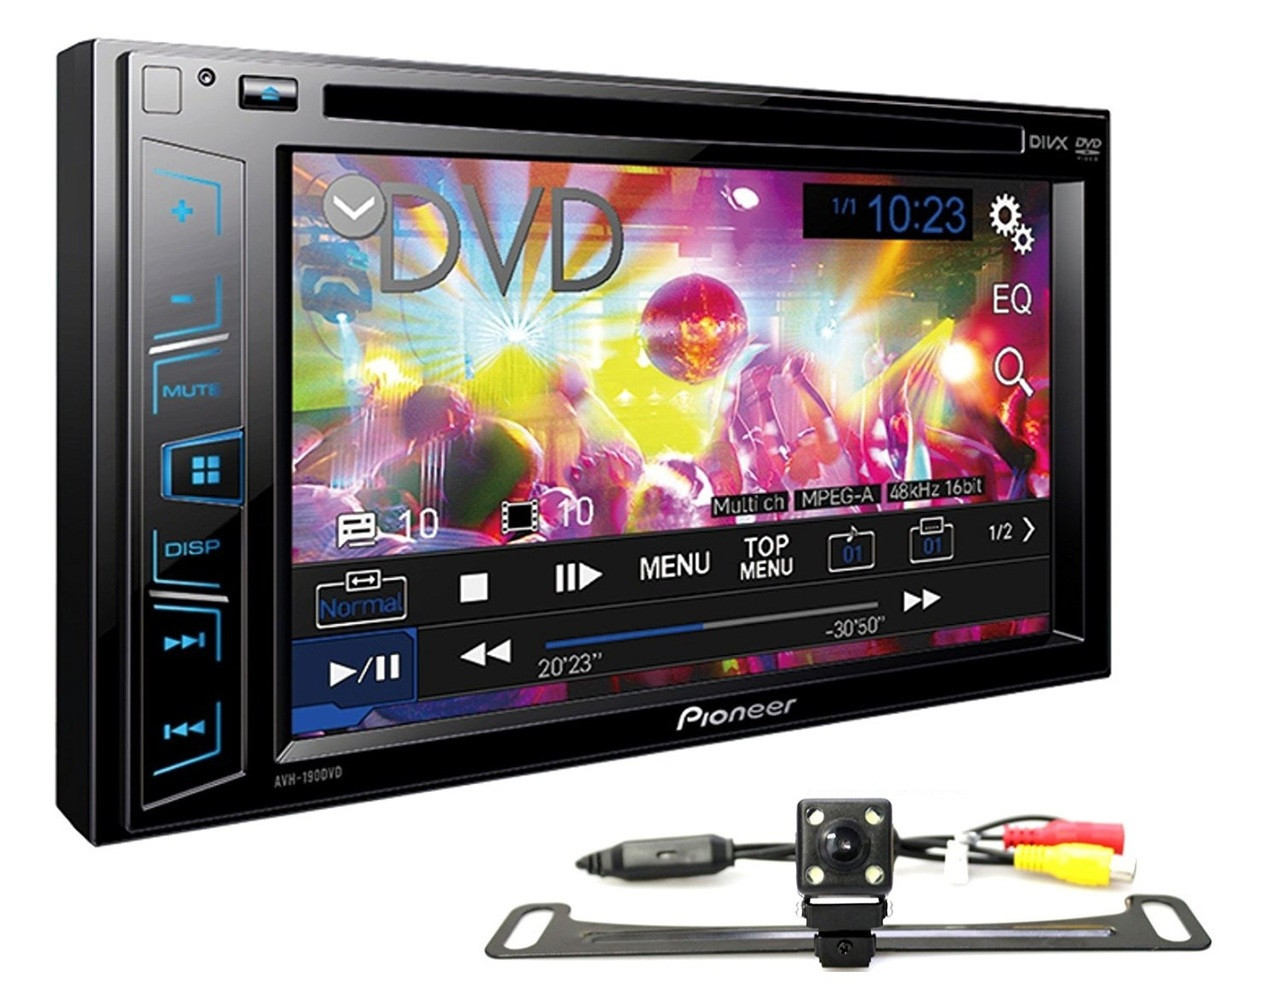 PIONEER AVH-190DVD 6.2" TOUCHSCREEN DVD CD CAR STEREO WITH FREE ABSOLUTE CAM-900 REAR VIEW CAMERA